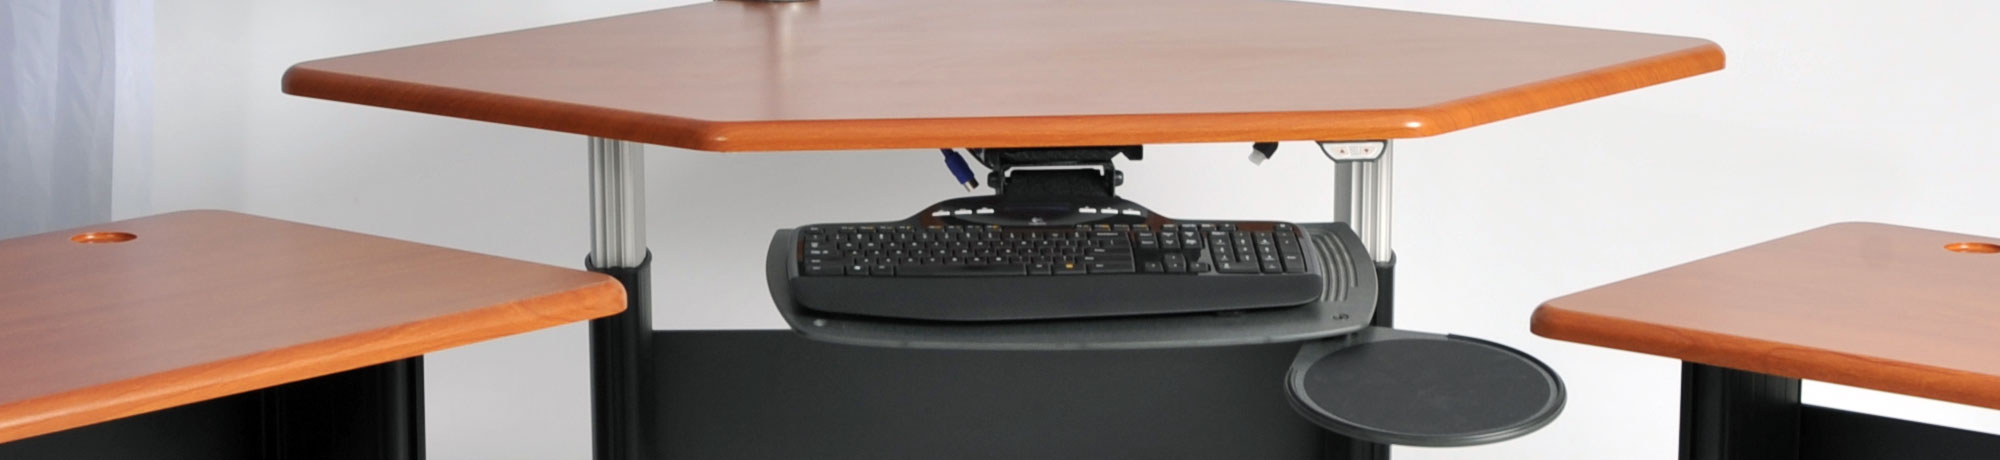 Stratis Office Keyboard Systems T3